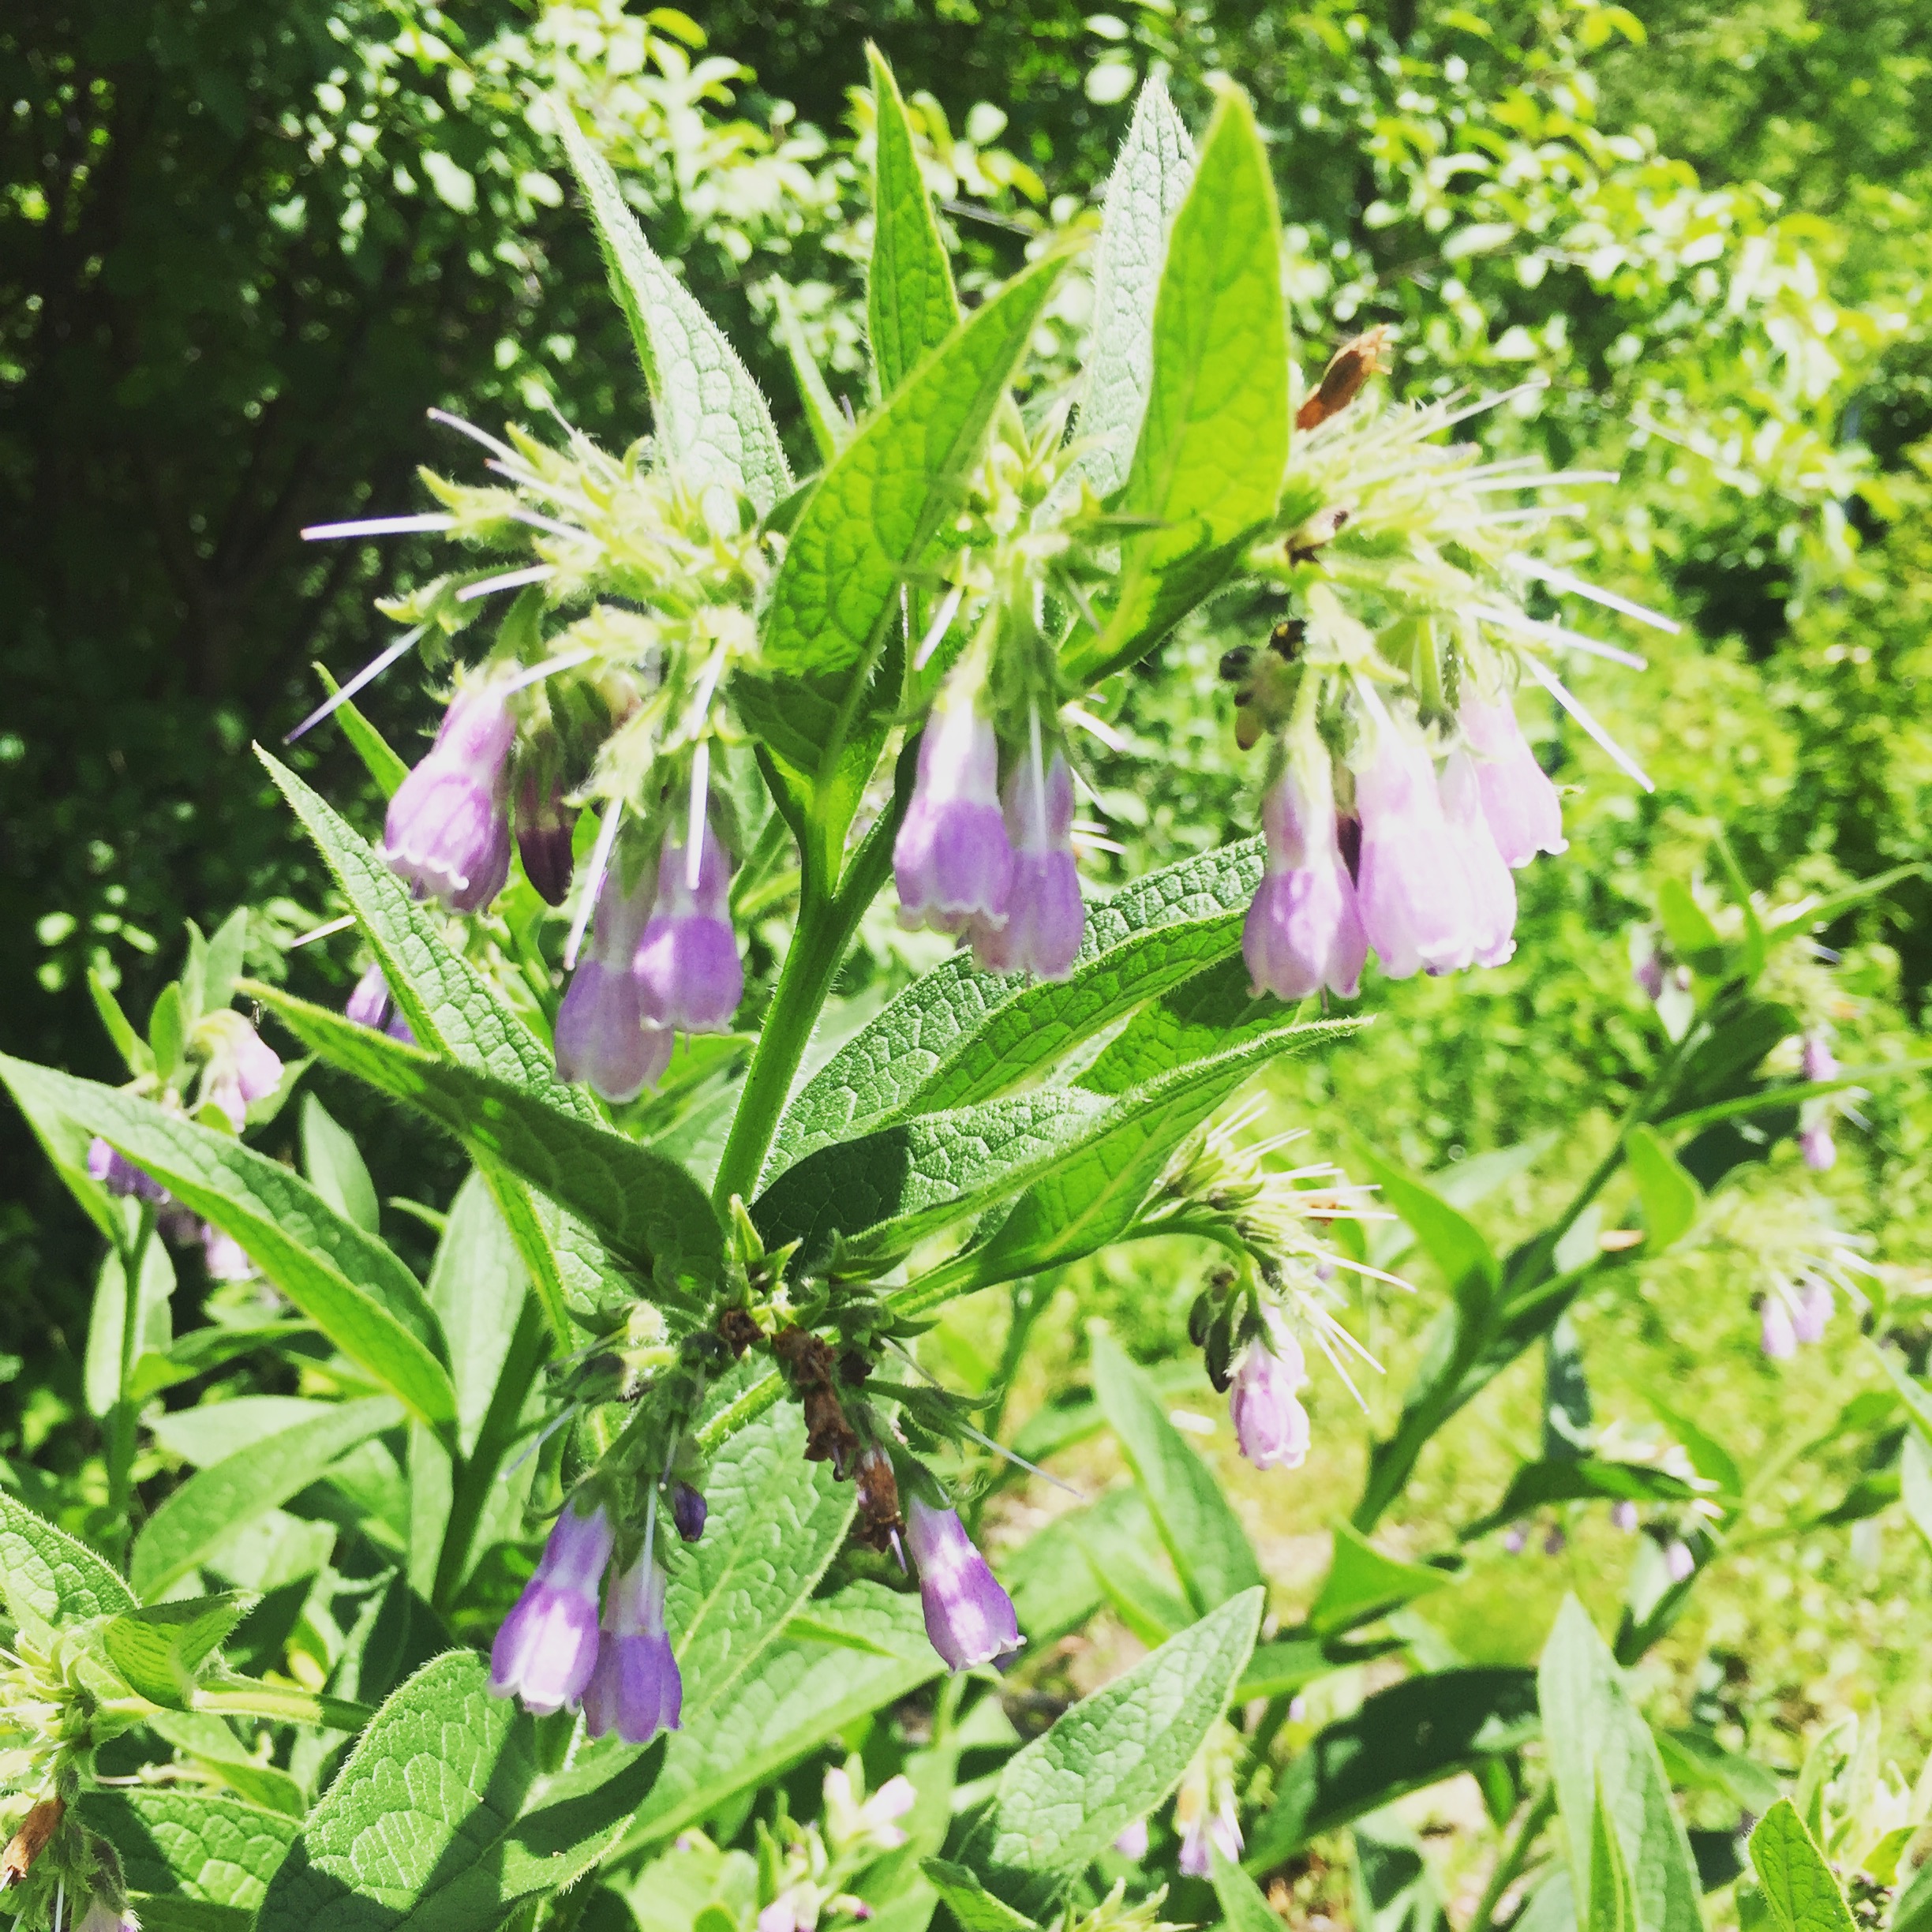  The comfrey is gorgeous and in full bloom — feeding pollinators and my soul. I will soon be harvesting the first stalks for  Green Wonder Salve  and other new salves making their debut this year. 